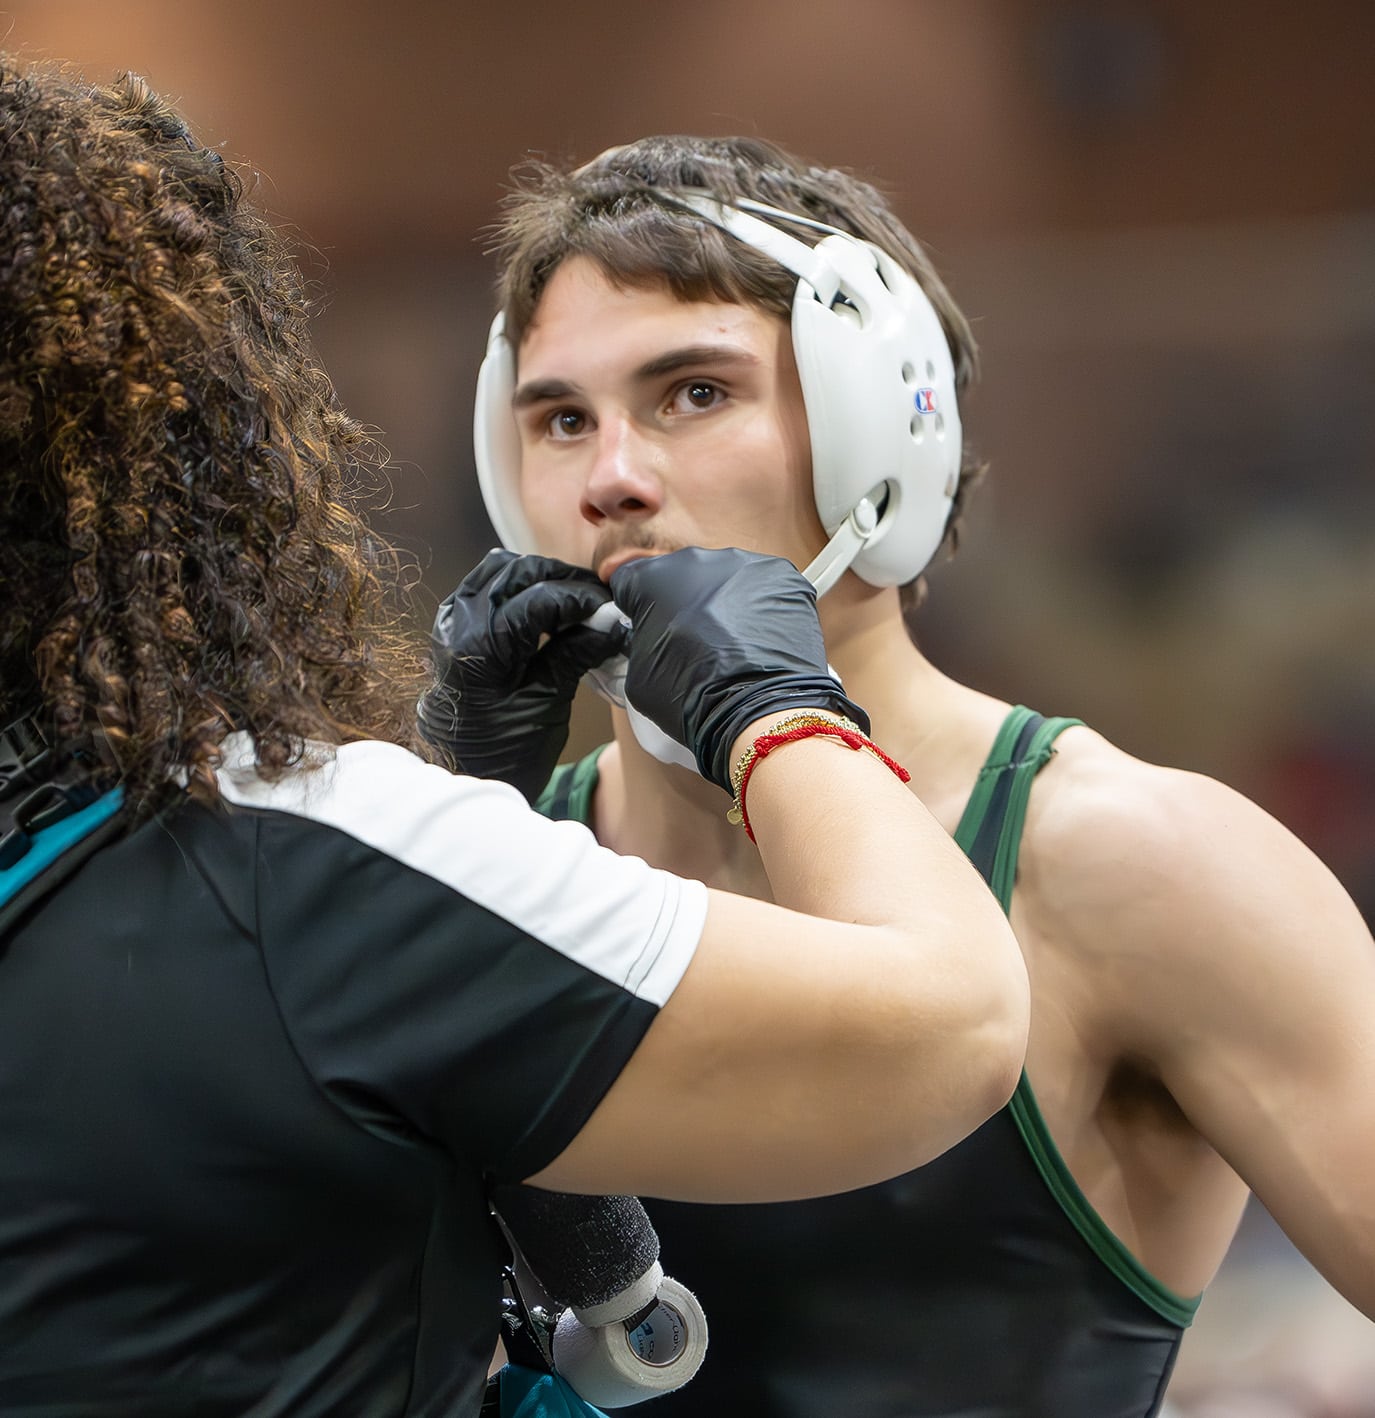 Weeki Wachee High 144 pound Ricky Bowermaster needed minor help for a bloody lip before defeating Talon Maple from Zephyr Hills Christian by Fall at 3:41 at the 2024 FHSAA State Championship in Kissimmee. [Photo by Joe DiCristofalo]